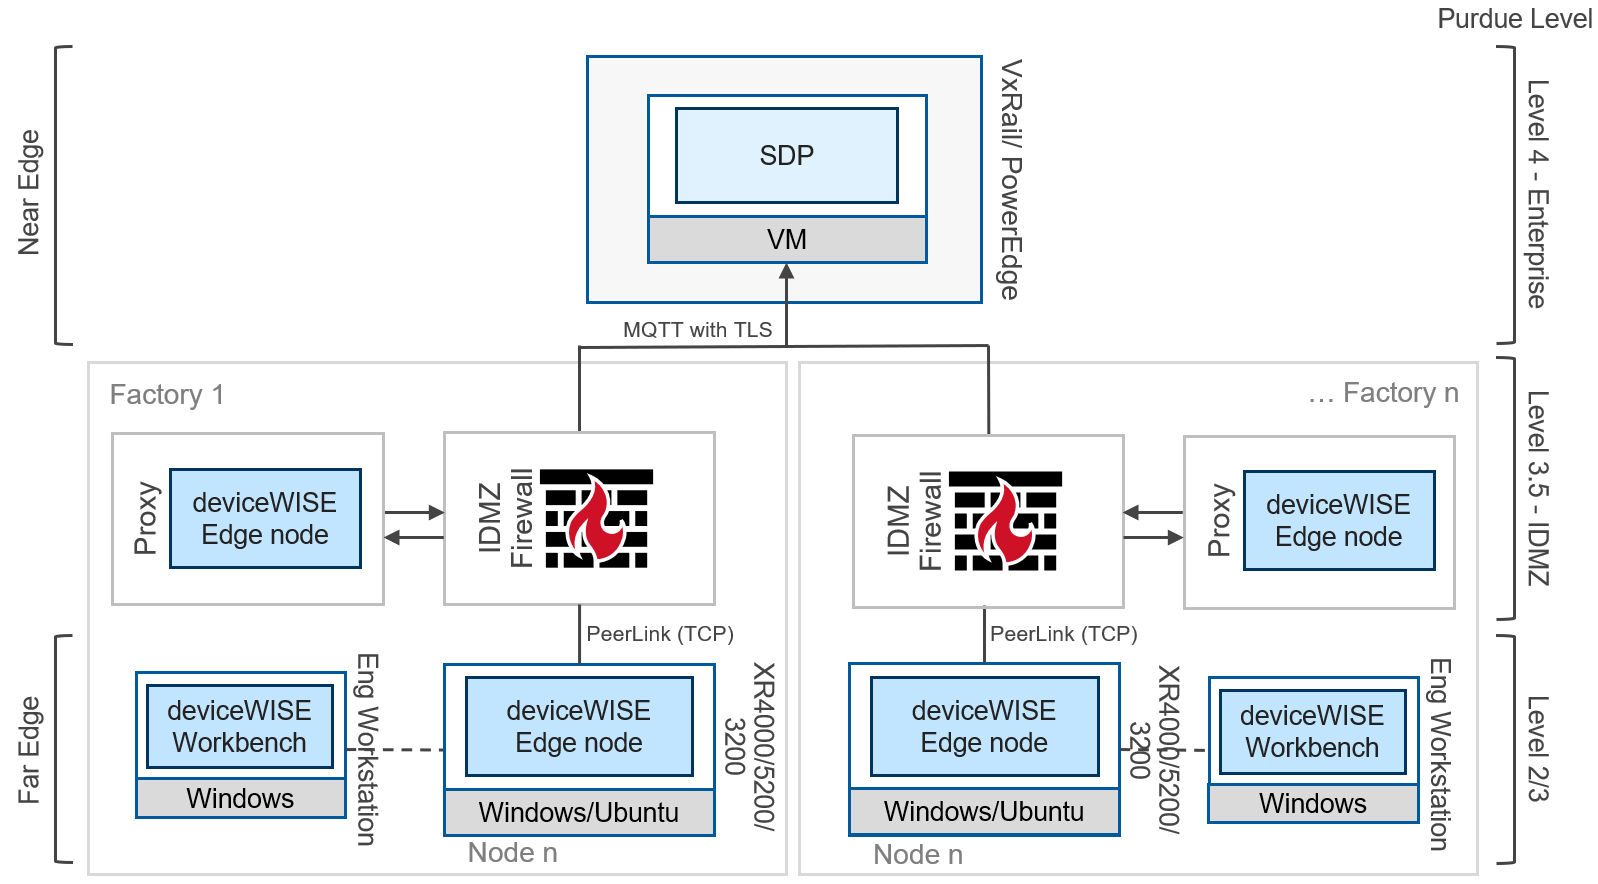 IDMZ architecture, incorporating a firewall and proxy between the control network and the enterprise network